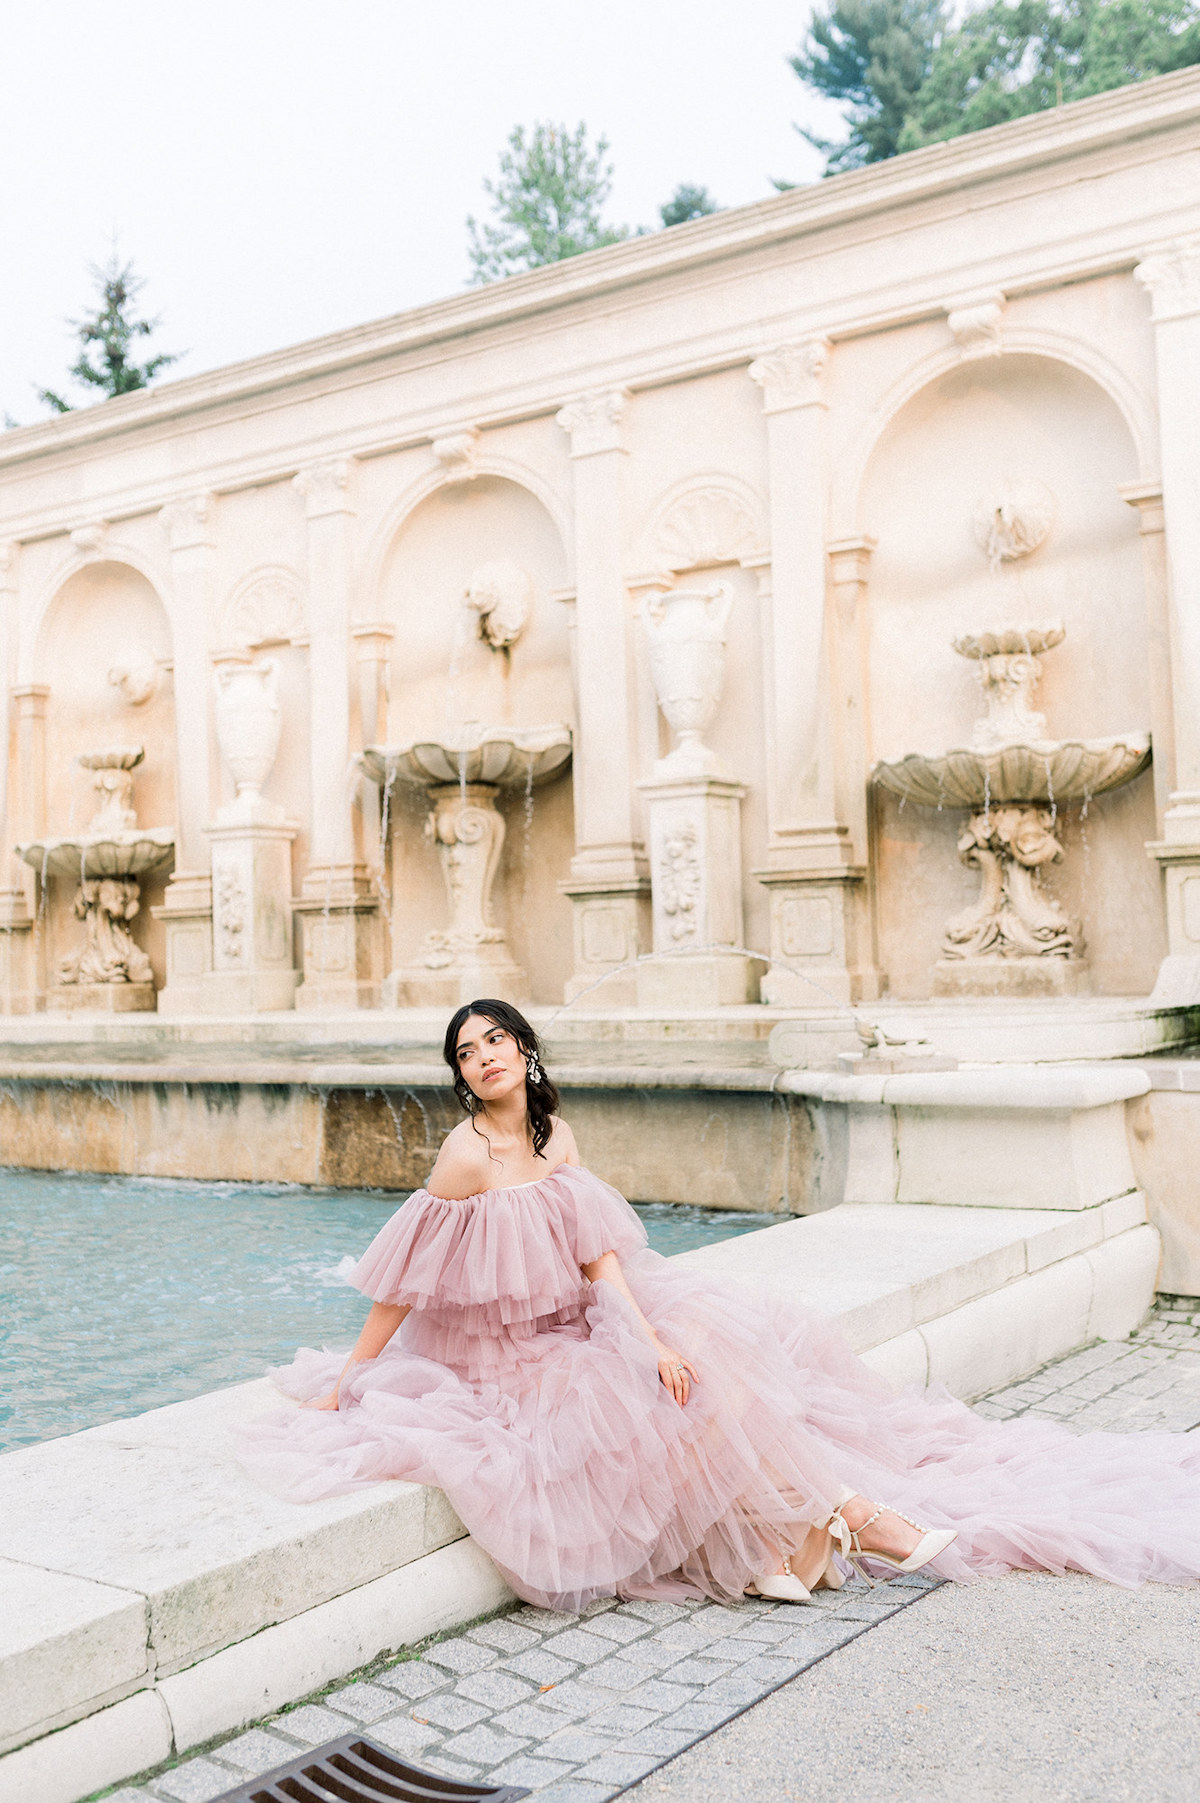 Karla's high-fashion editorial pose in the couture gown adds a touch of drama and sophistication to the picturesque surroundings of Longwood Gardens.